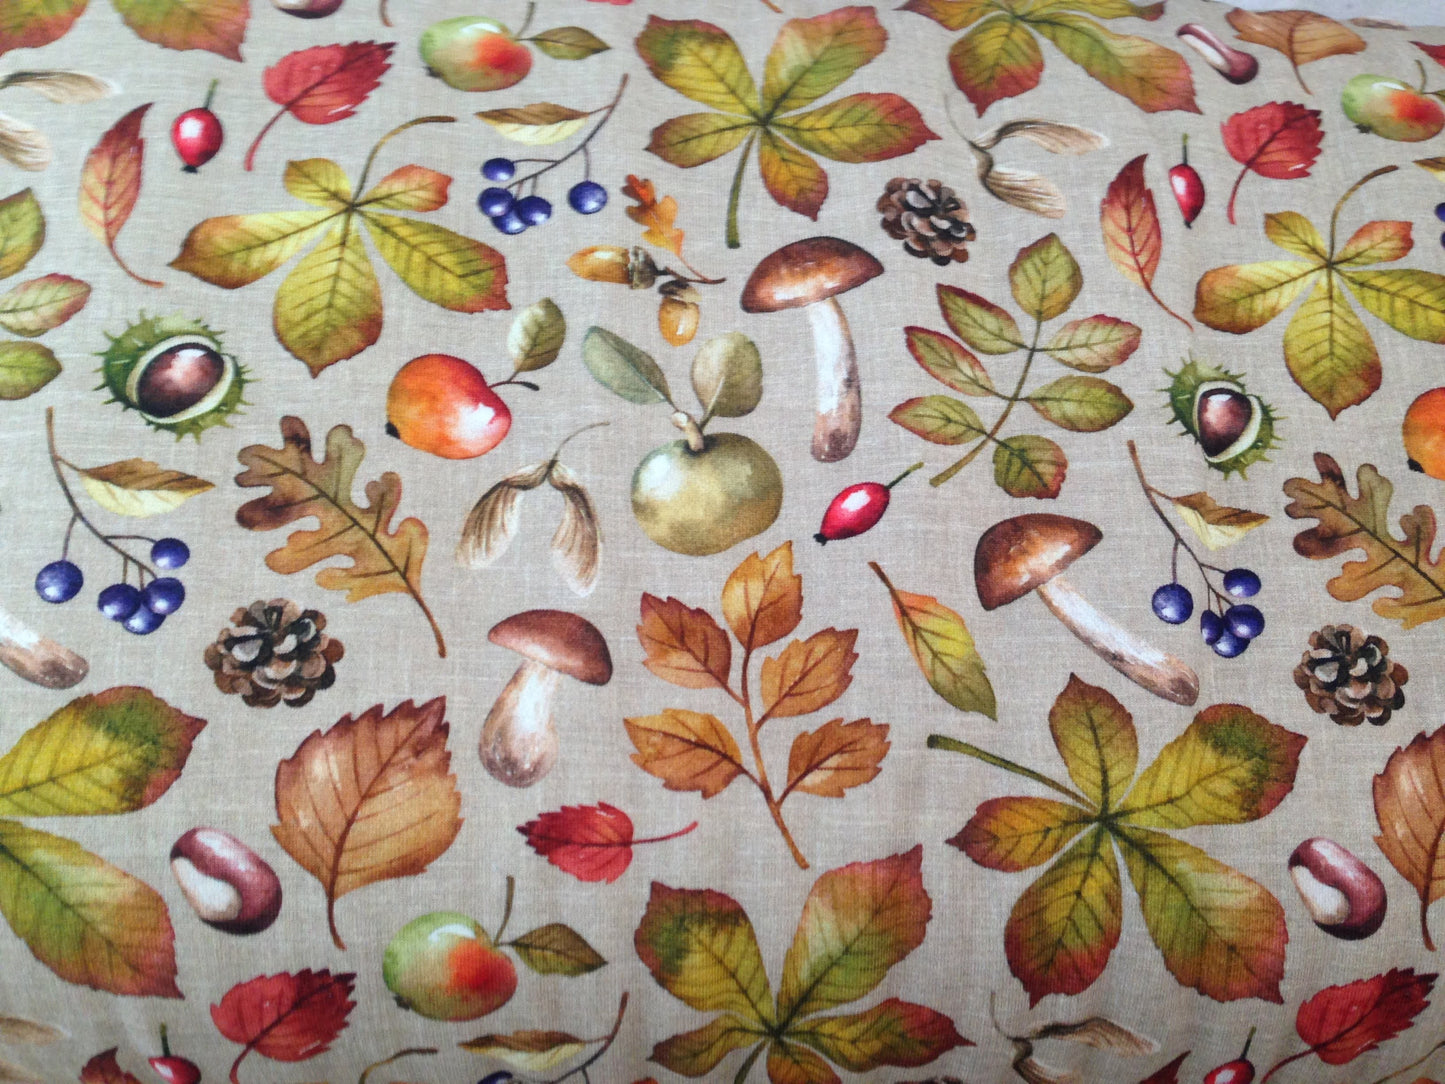 Organic jersey fabric with grey burlap cloth optic background and fall foliage pattern: Colorful leaves, mushrooms, rosehips, apples, chestnuts, blue berries, pine cones